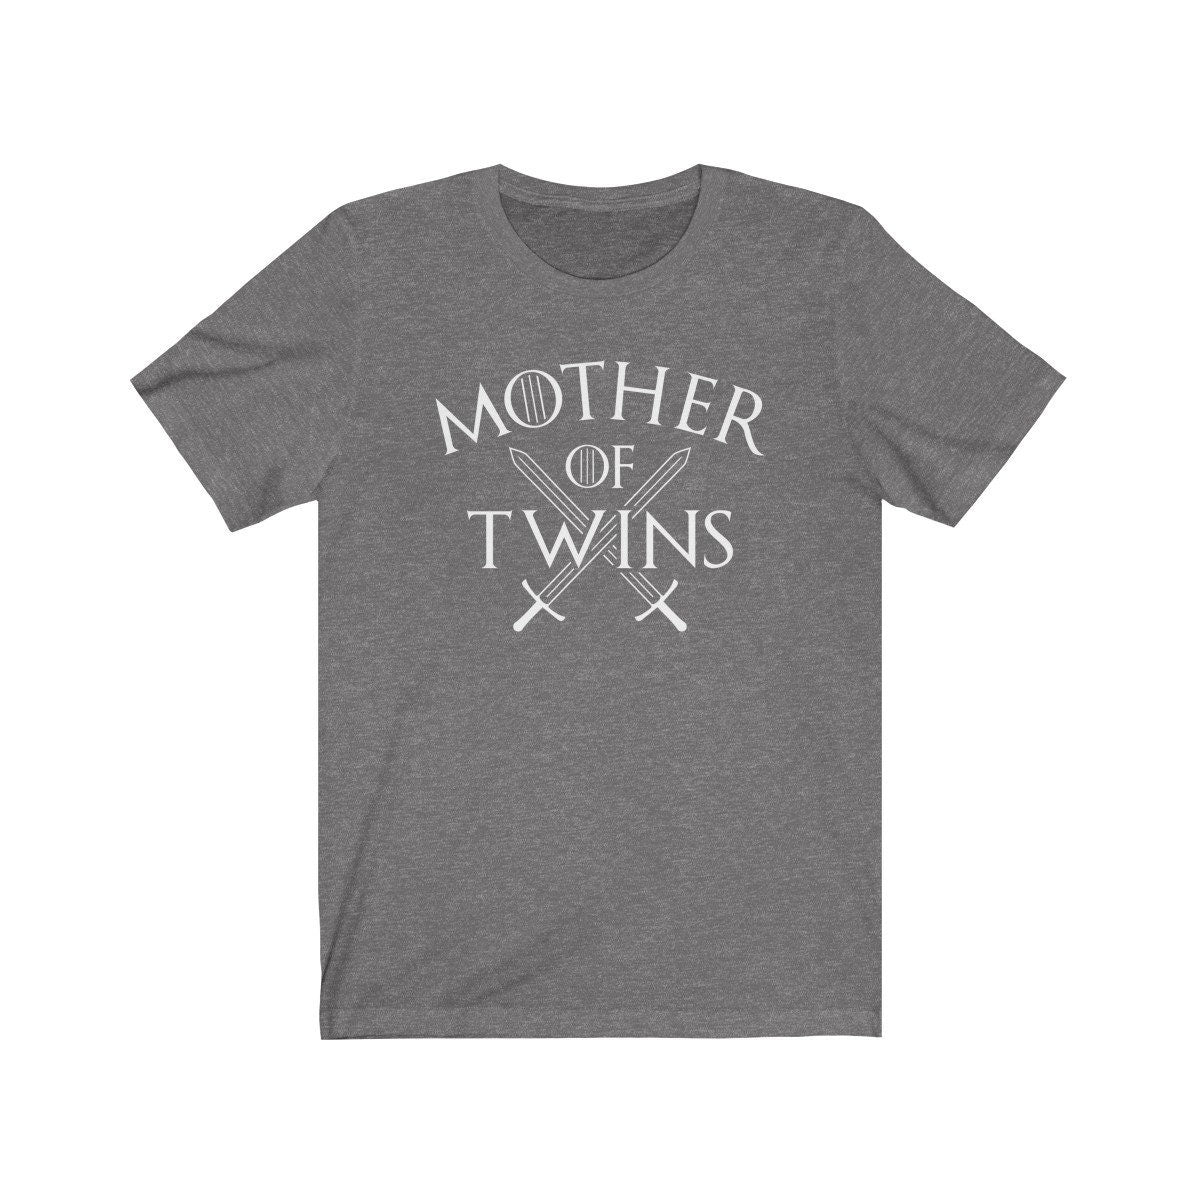 Mother of Twins Gift T-Shirt for Wife or Mother - Humorous GOT Shirt